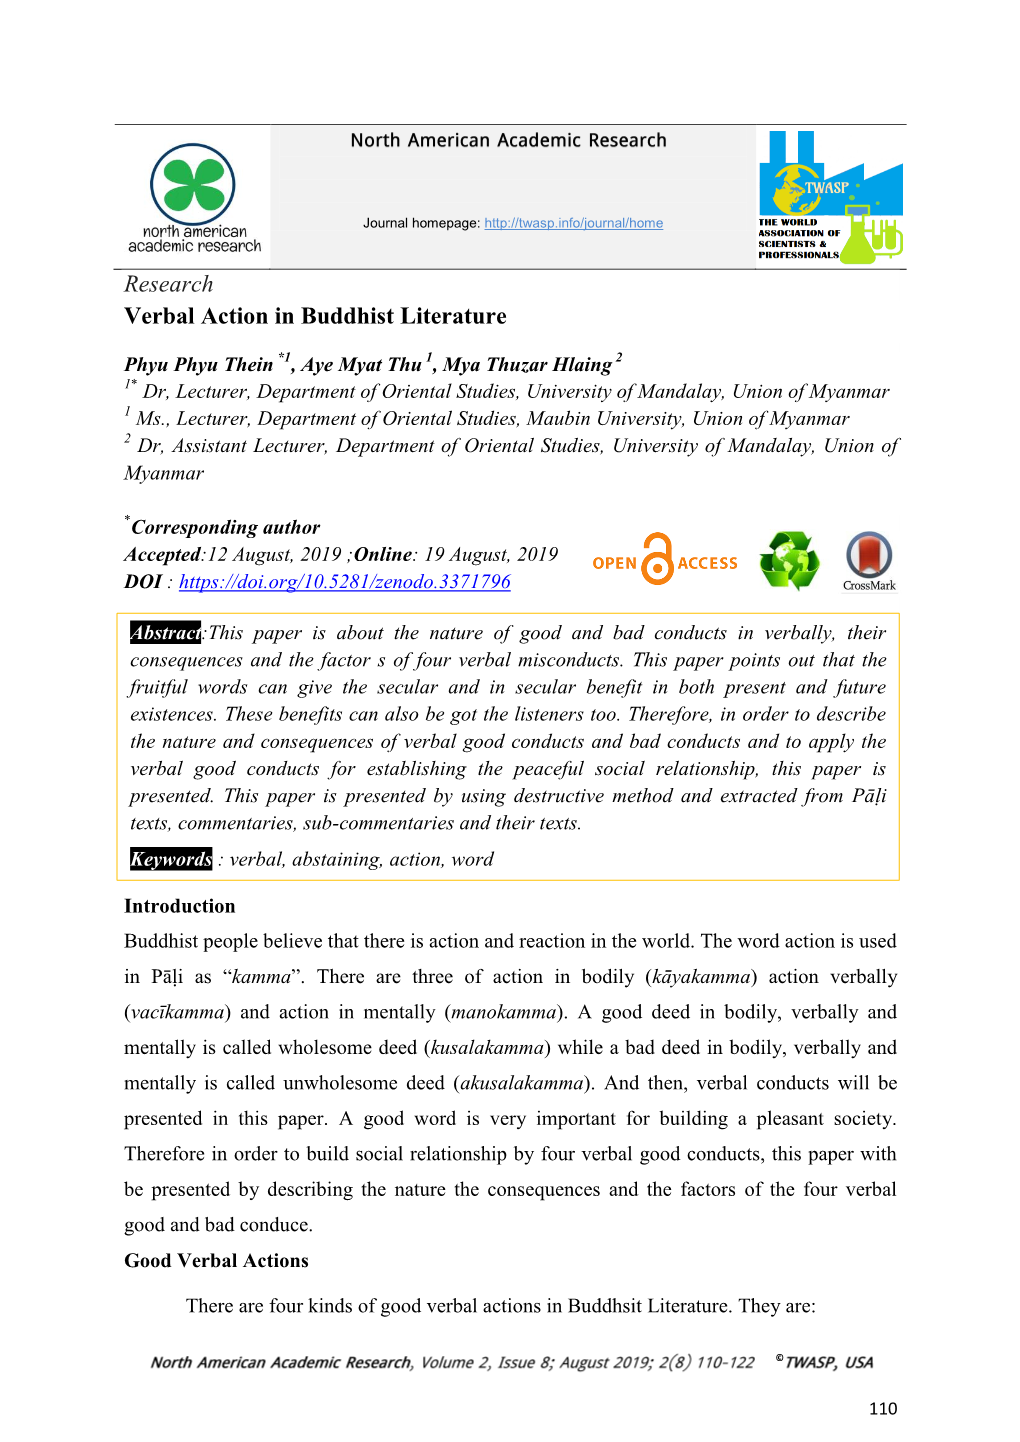 Research Verbal Action in Buddhist Literature